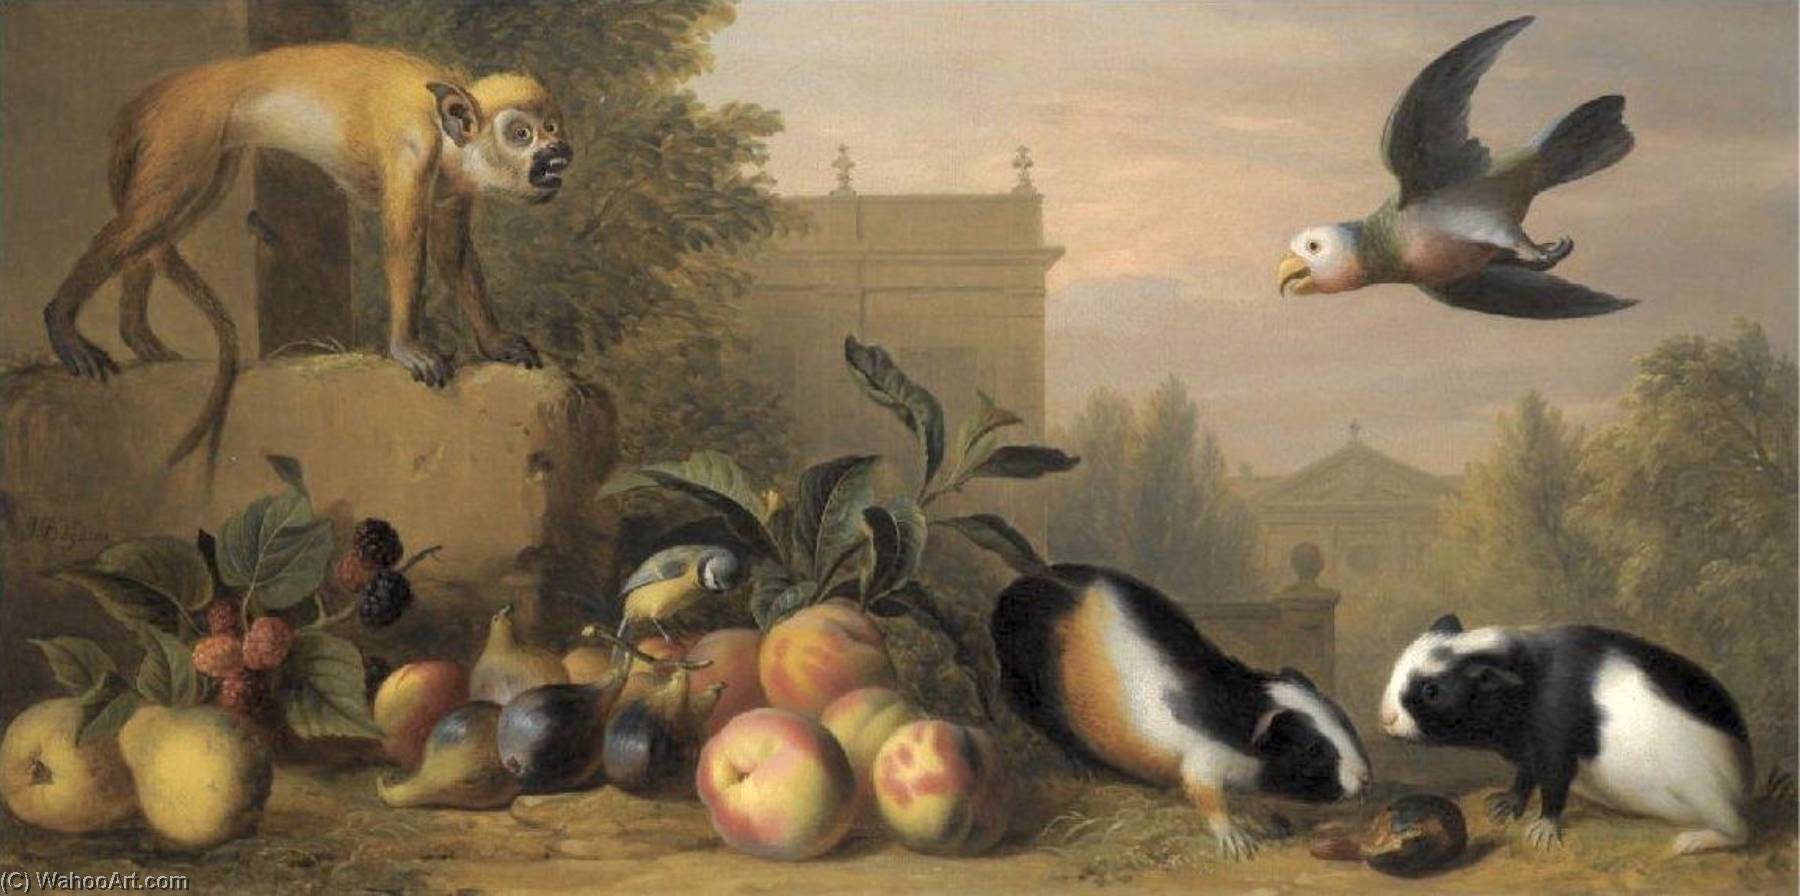 WikiOO.org - Encyclopedia of Fine Arts - Lukisan, Artwork Jakob Bogdani - Capuchin squirrel monkey, two guinea pigs, a blue tit and an Amazon St. Vincent parrot with Peaches, Figs and Pears in a landscape